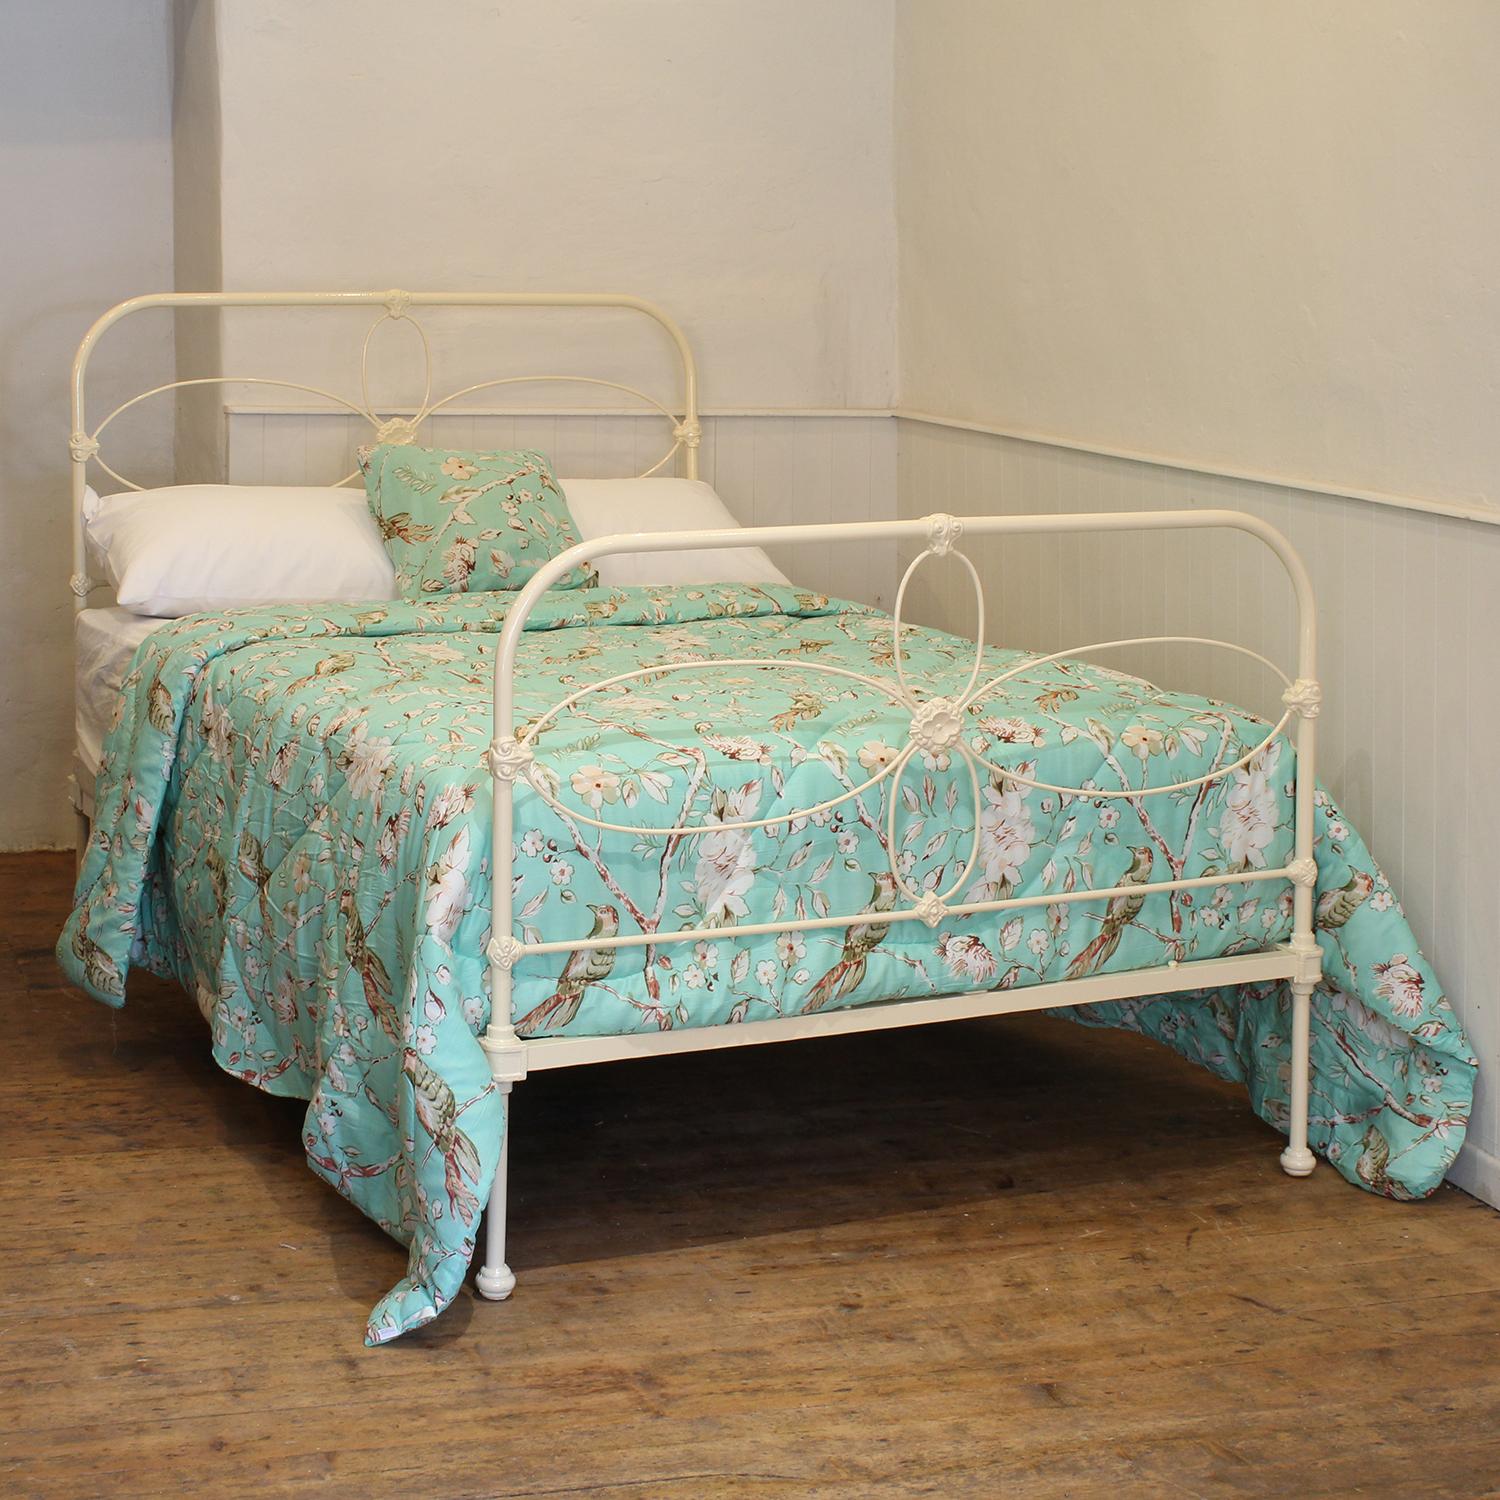 A Victorian cast iron bedstead finished in cream with arch shaped panels and dainty, decorative castings.

This bed accepts a double size 4ft 6in wide (54 inch or 135cm) base and mattress. 

The price includes a firm standard bed base to support